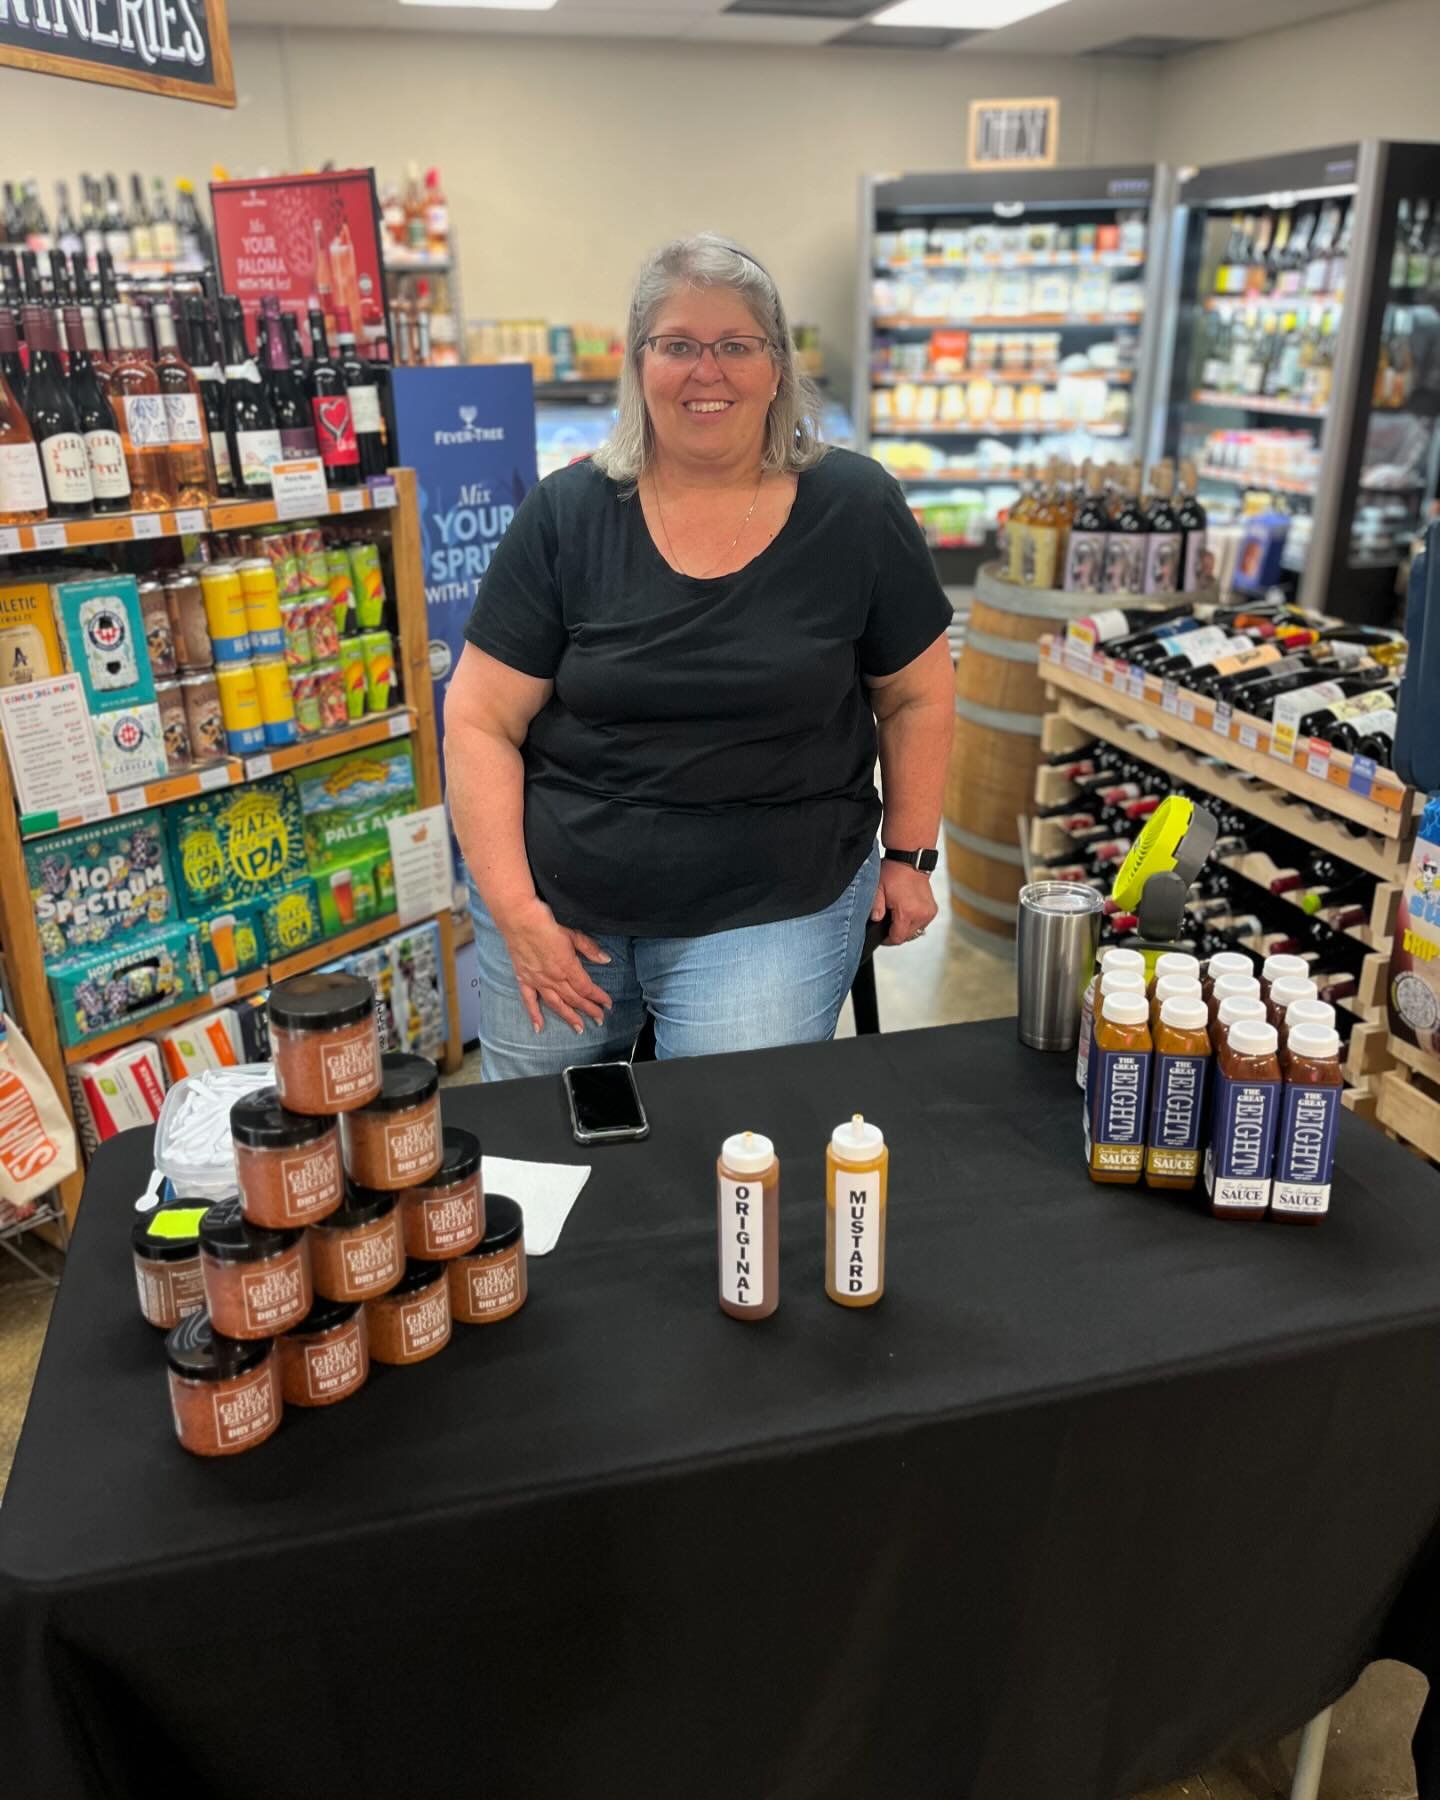 Oh well, guess we&rsquo;re grilling tonight! @thegreateightllc sauces and ribs will have you reaching for a cookout! Sampling now until 4 today, come try this stuff, you&rsquo;ll never be the same.